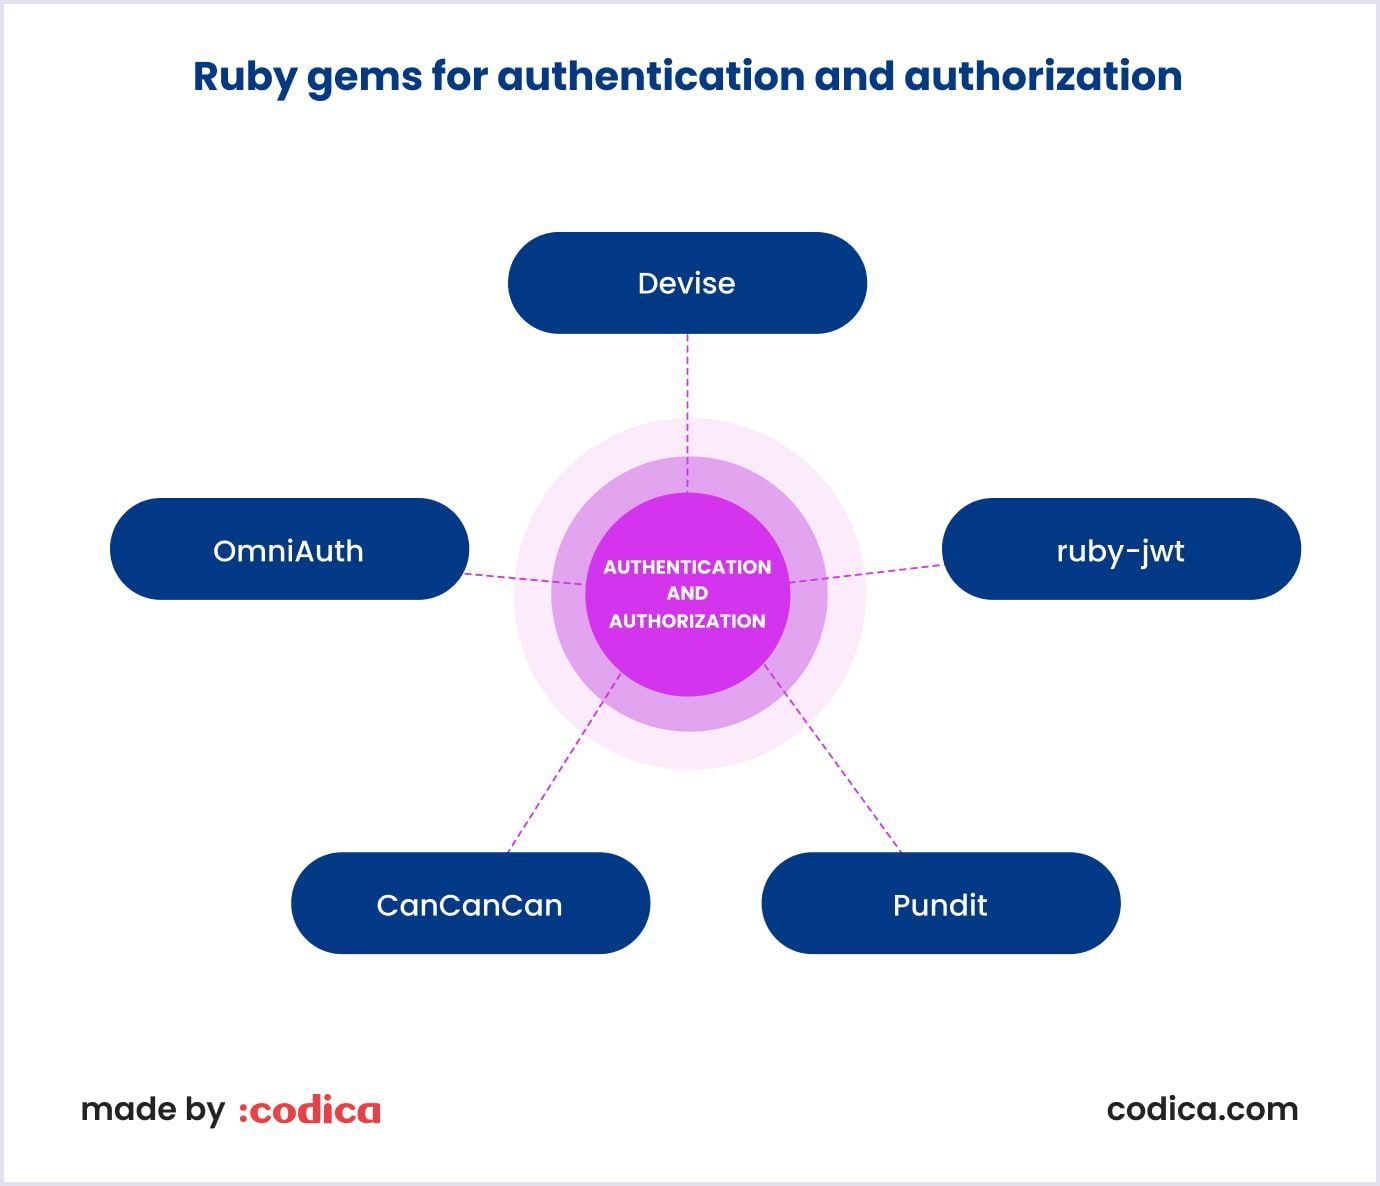 Best Ruby gems for authentication and authorization